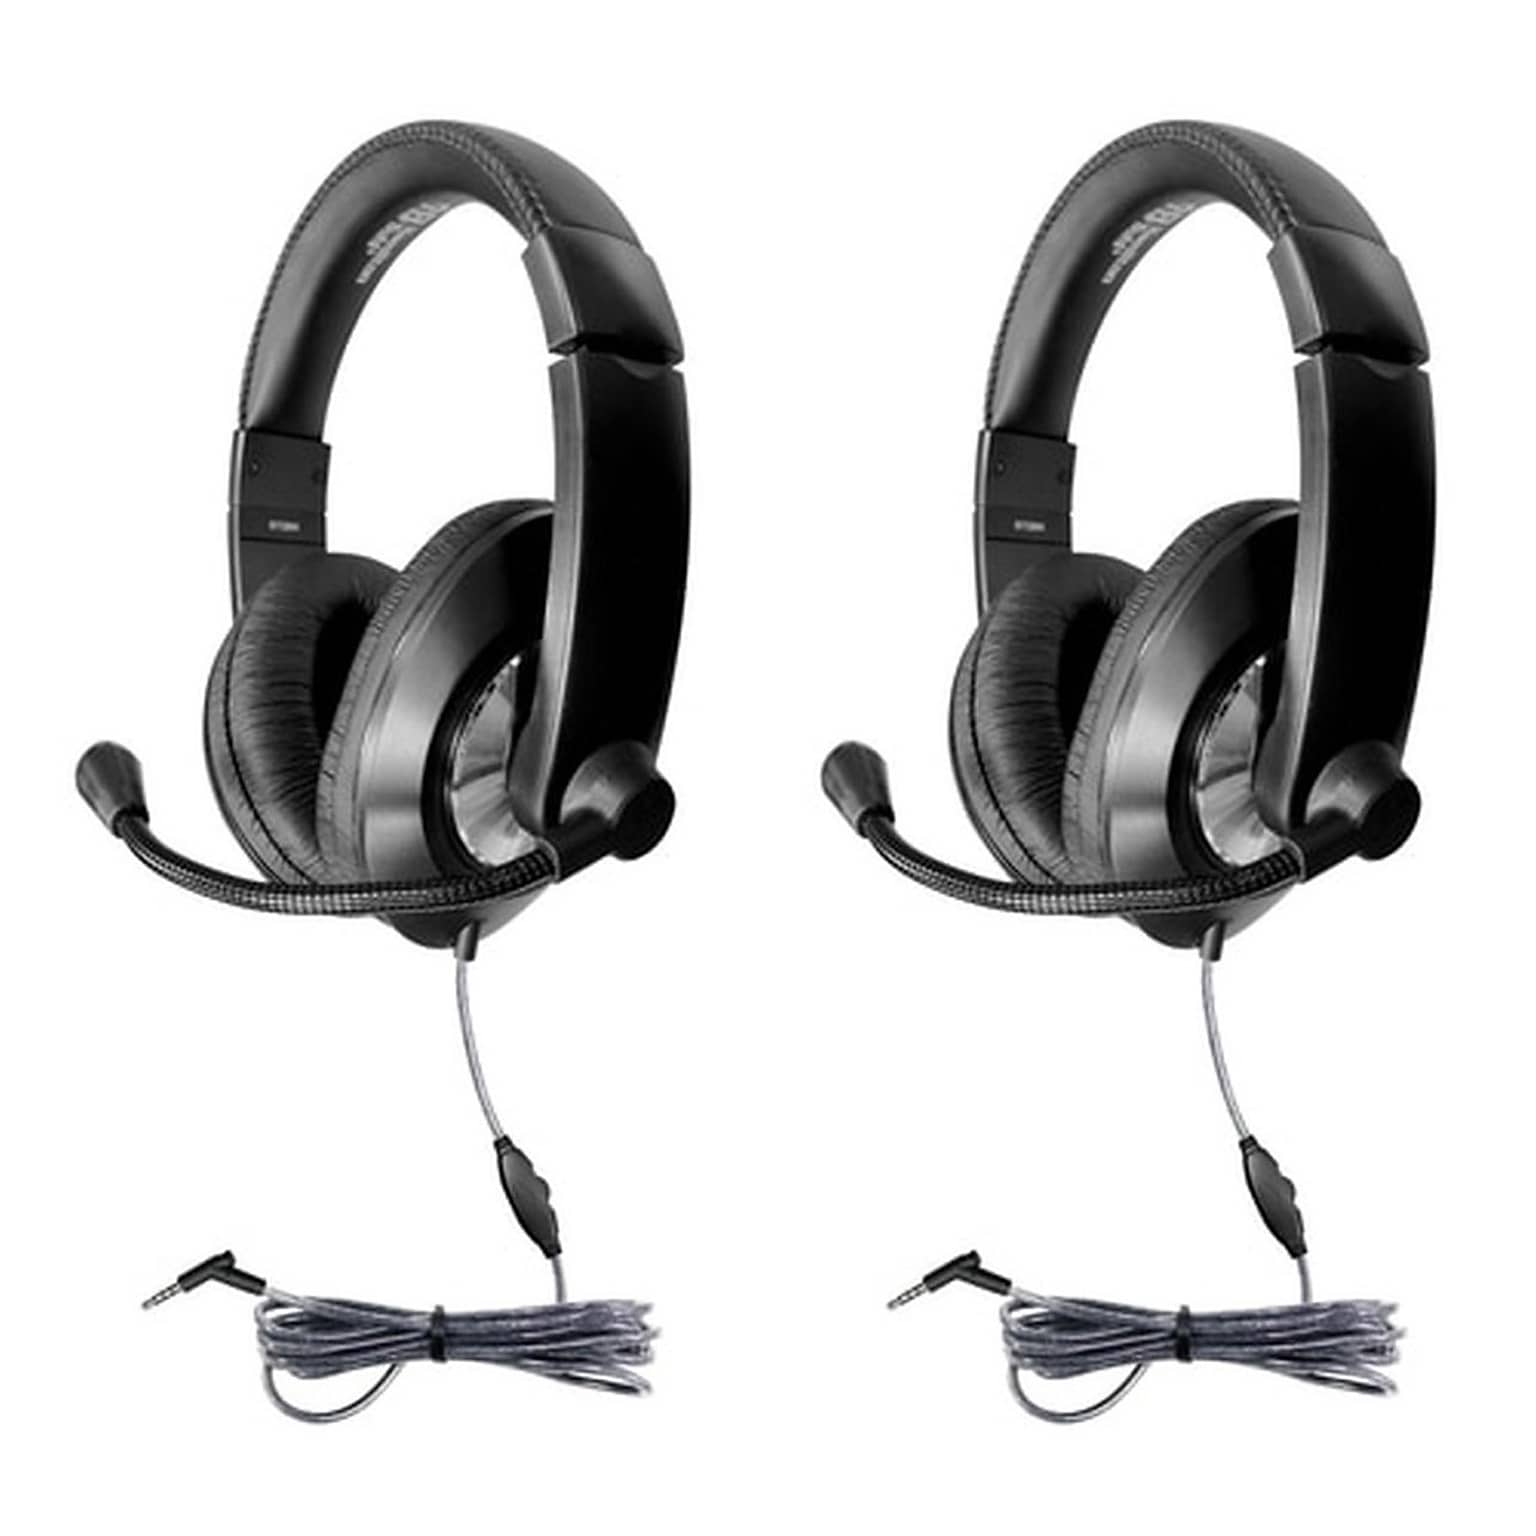 HamiltonBuhl® Smart-Trek Deluxe Stereo Headset with In-Line Volume Control & 3.5mm TRRS Plug, Pack of 2 (HECST2BK-2)